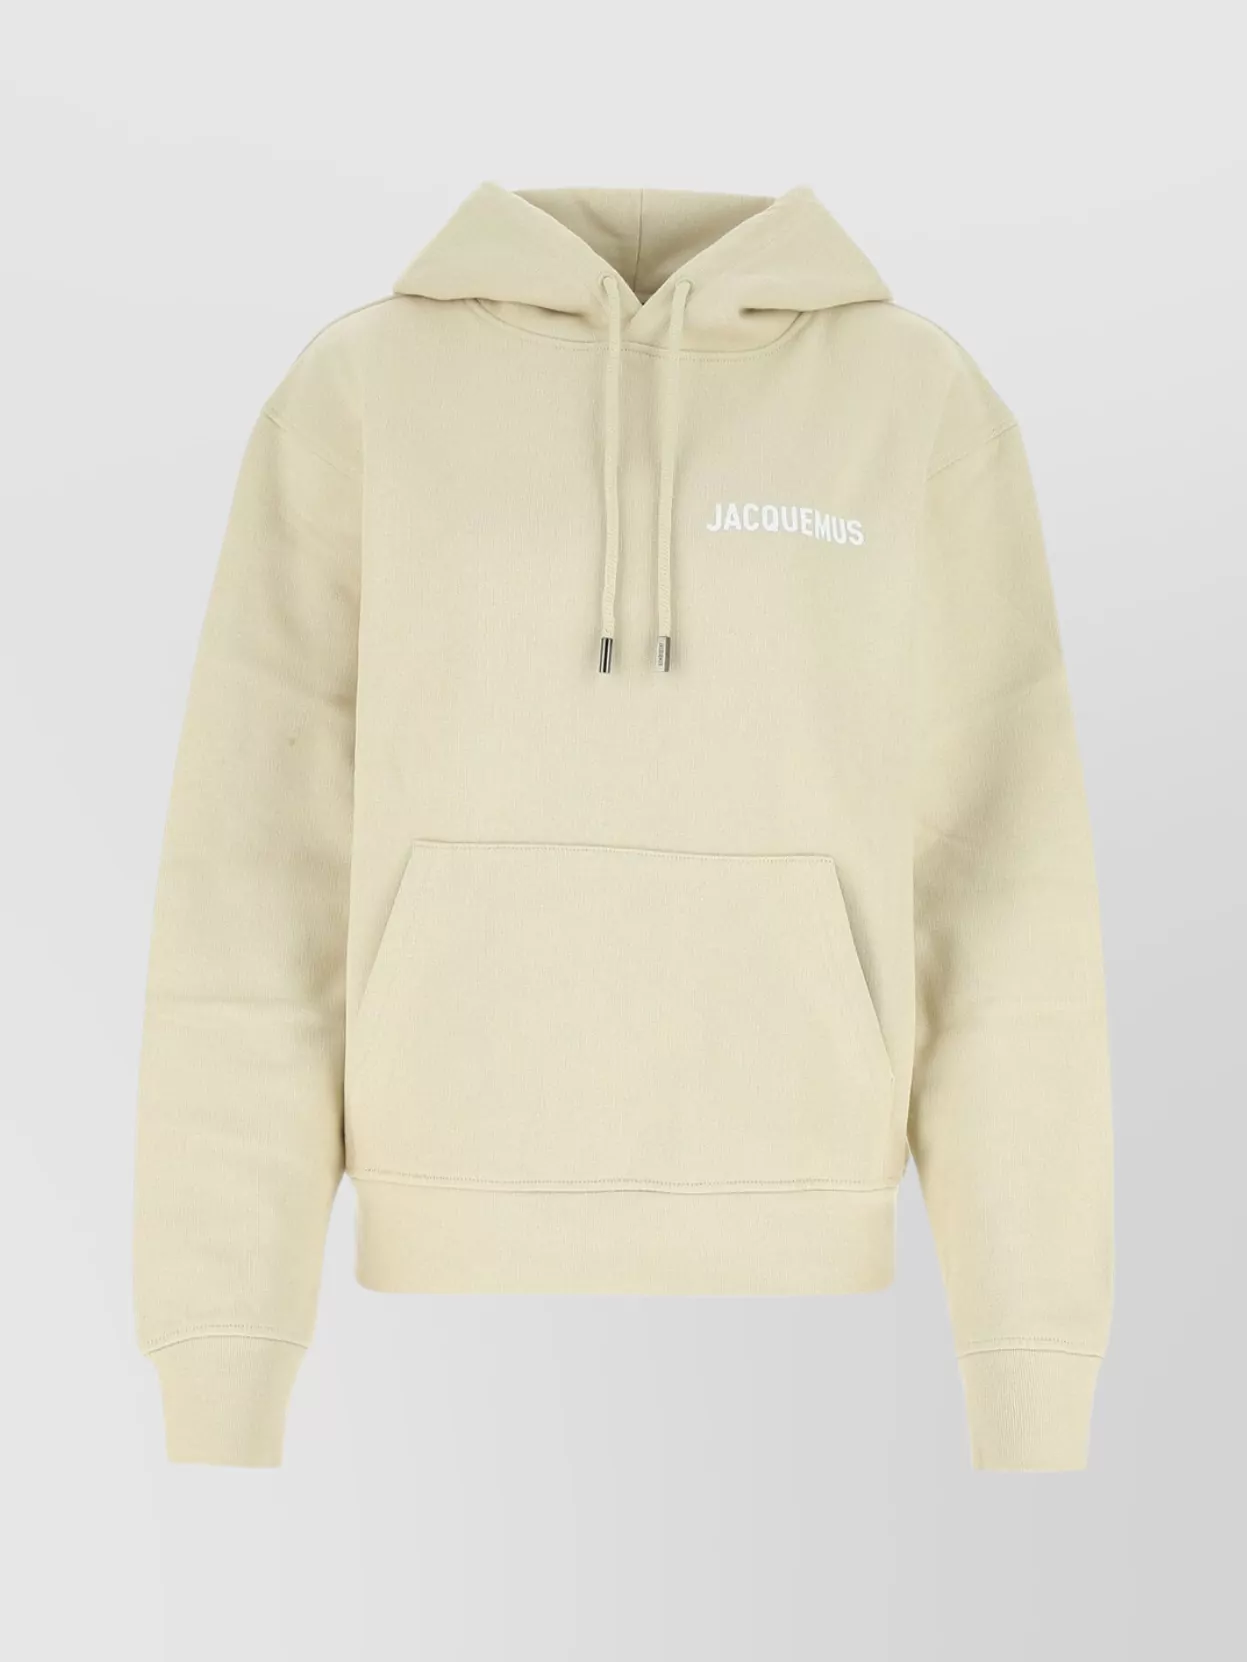 Jacquemus Cotton Sweatshirt With Front Pocket And Hood In Beige